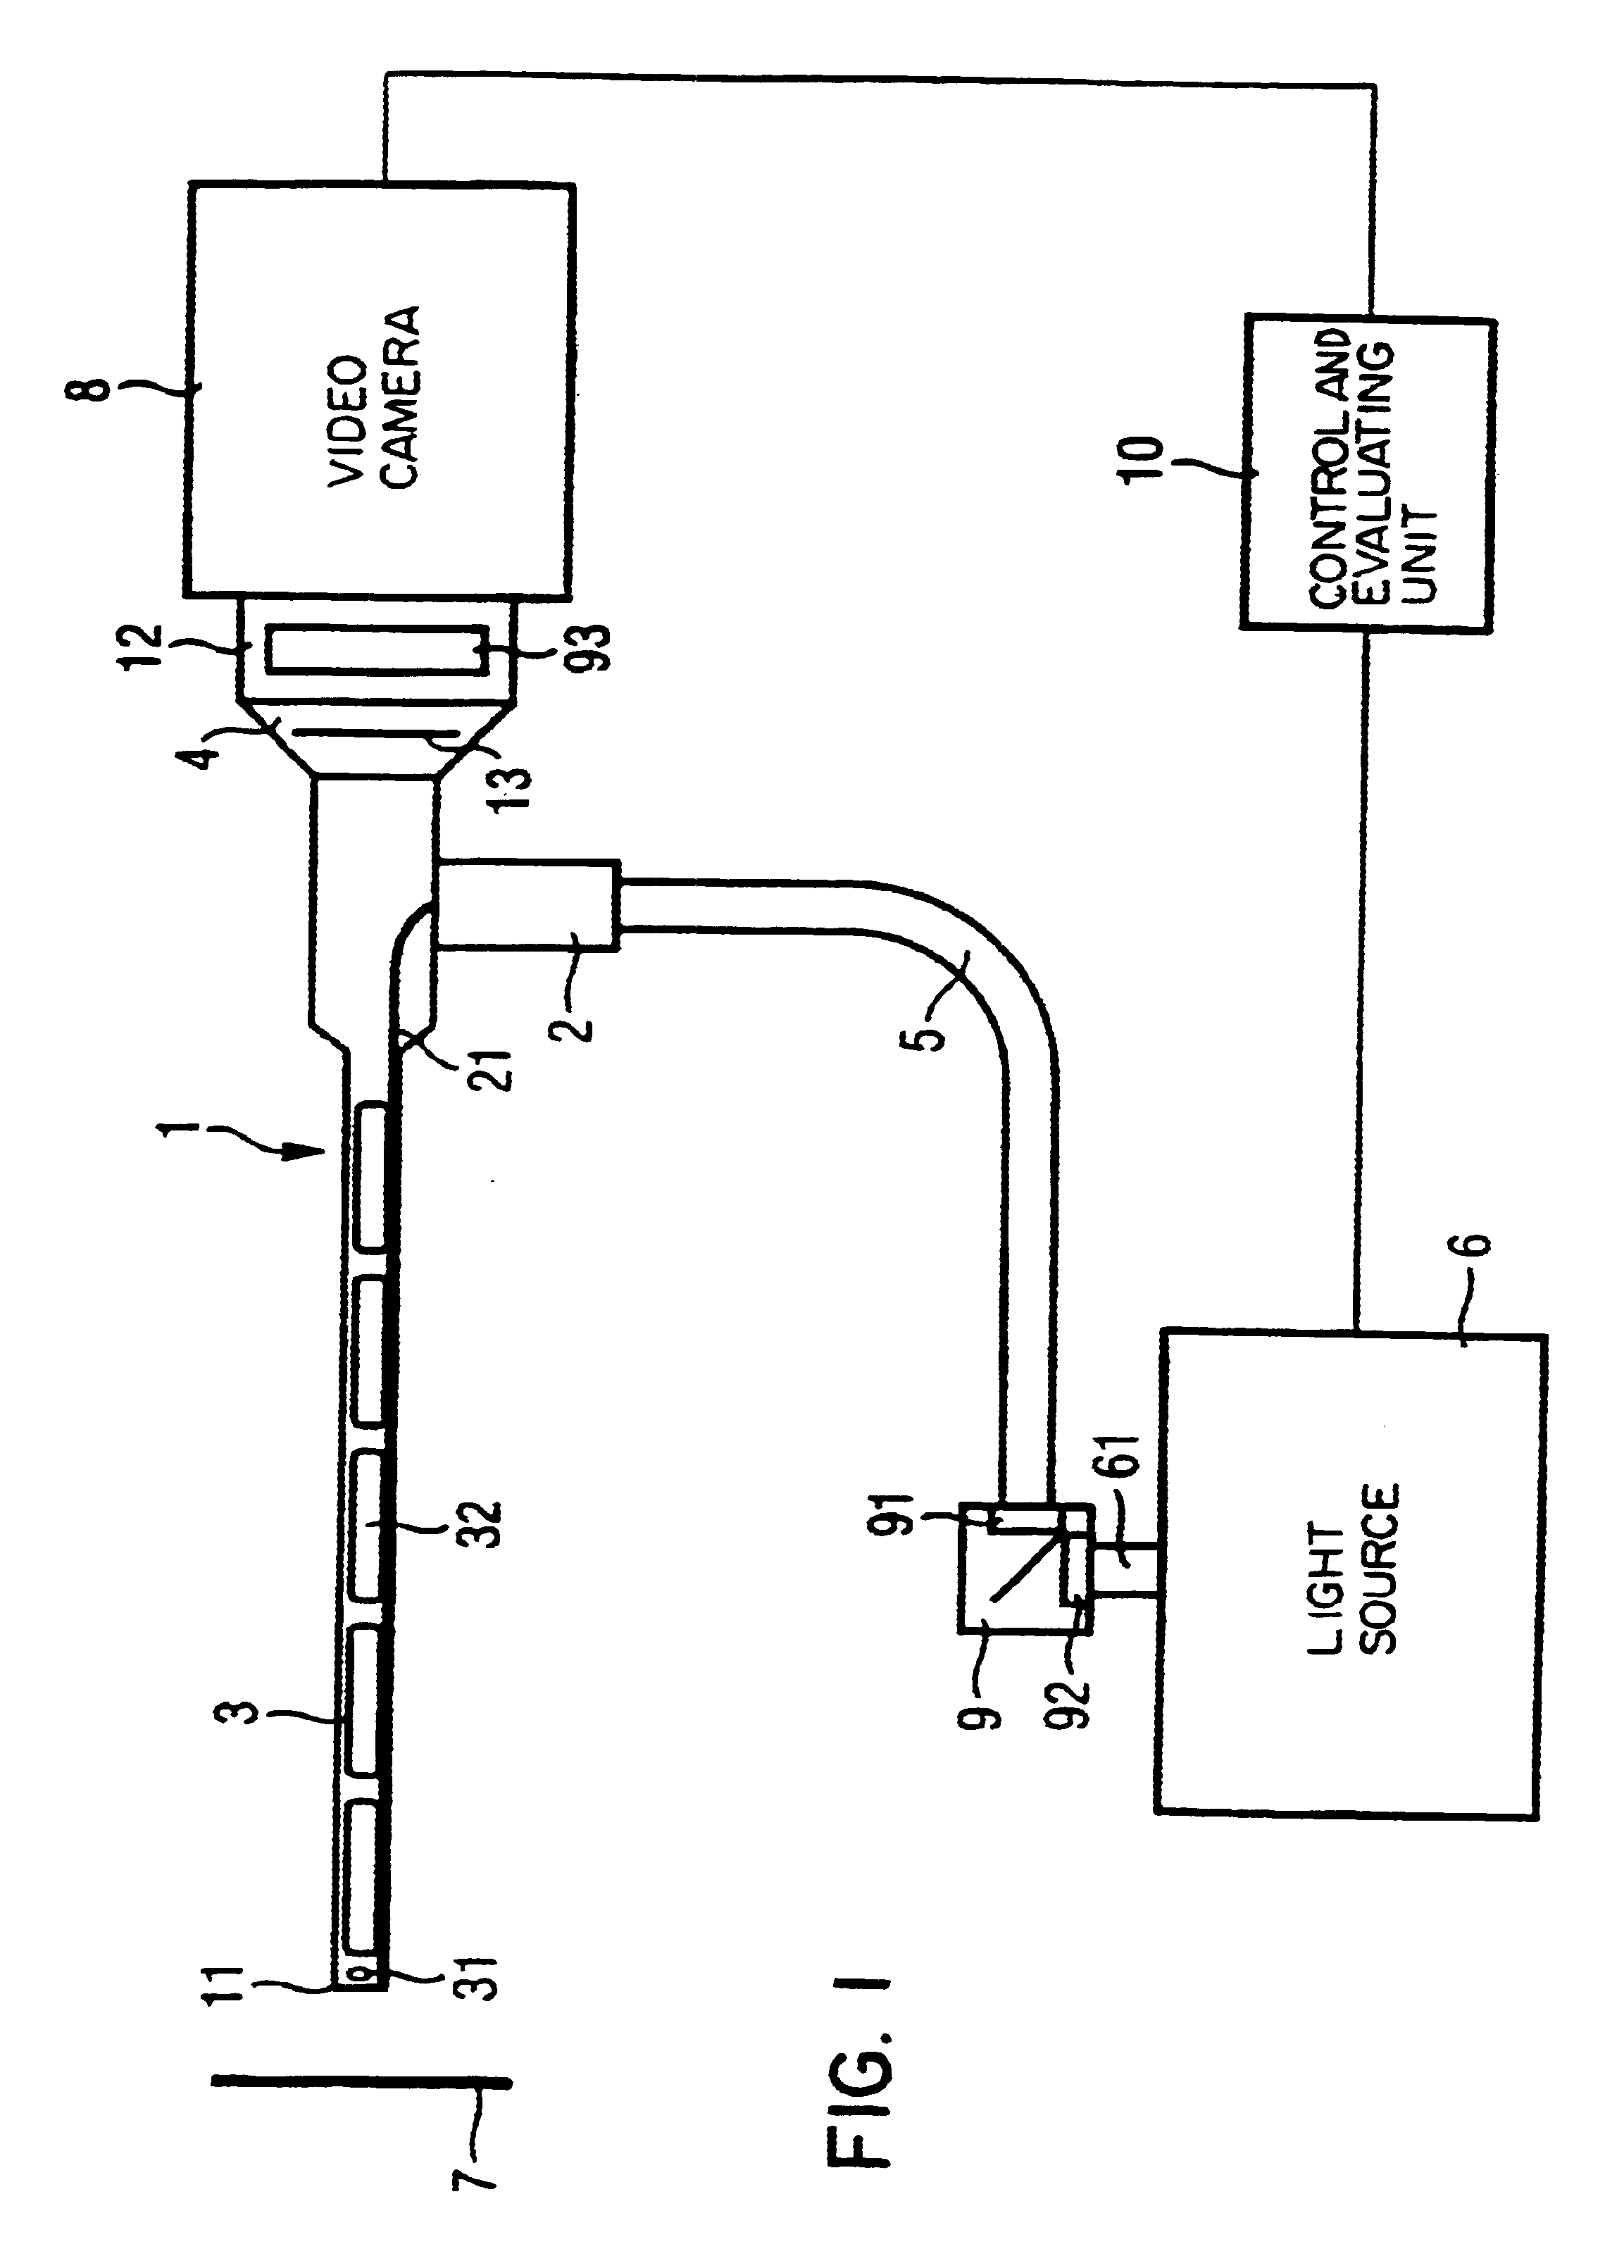 Device for photodynamic diagnosis or treatment